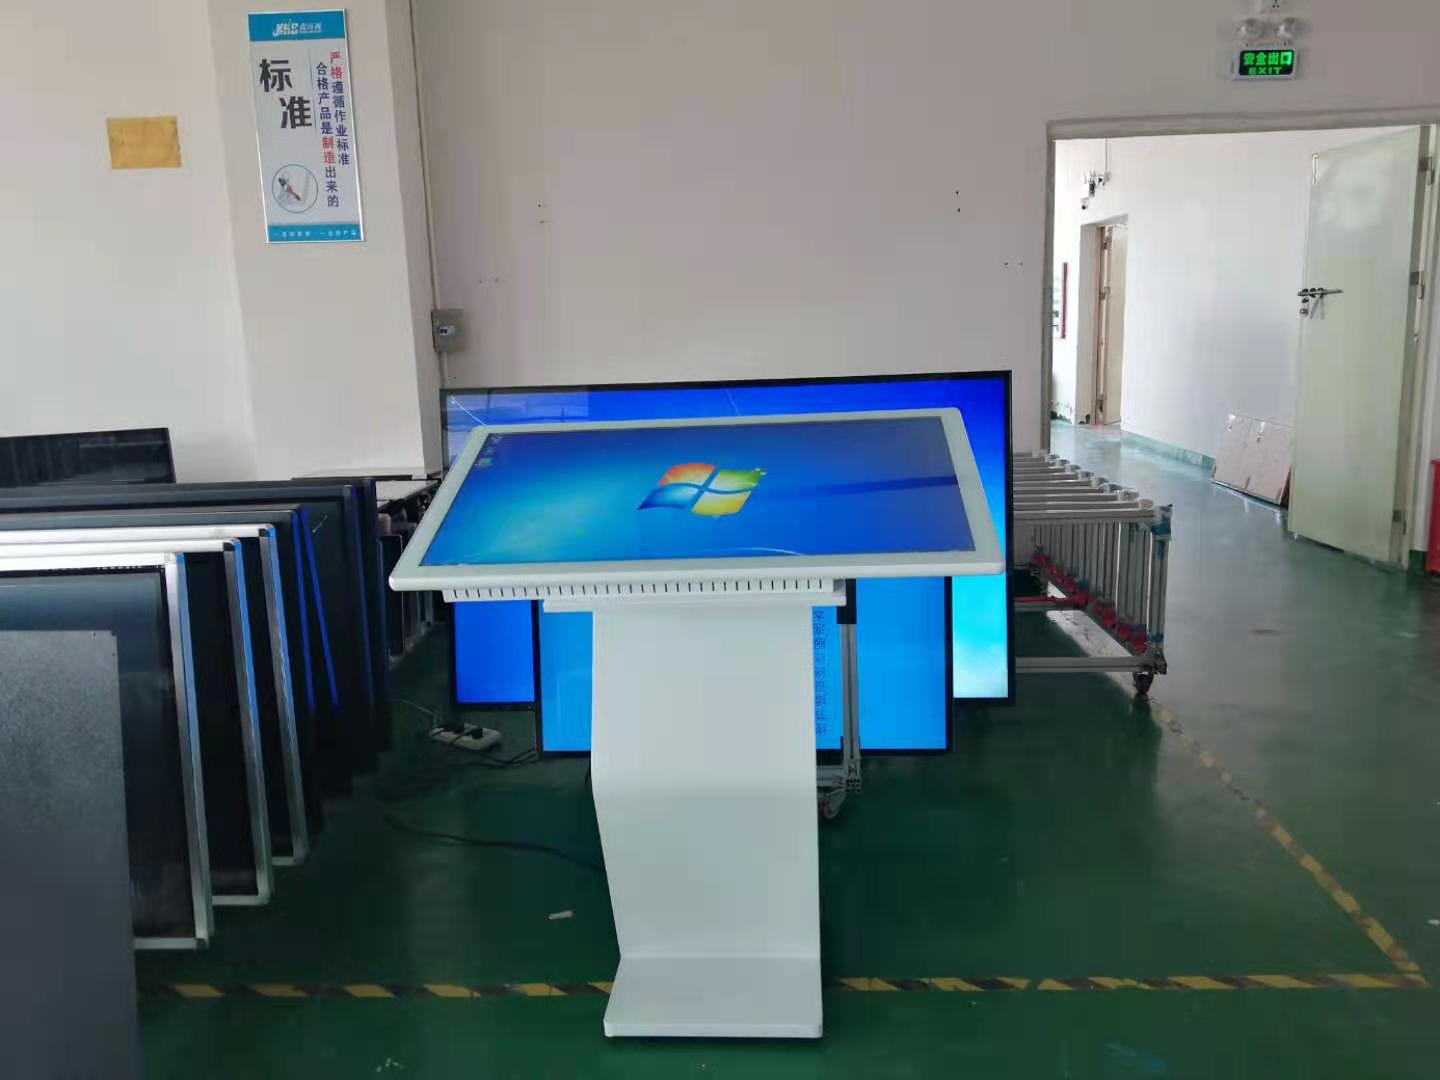 Application fields of indoor and outdoor advertising machines